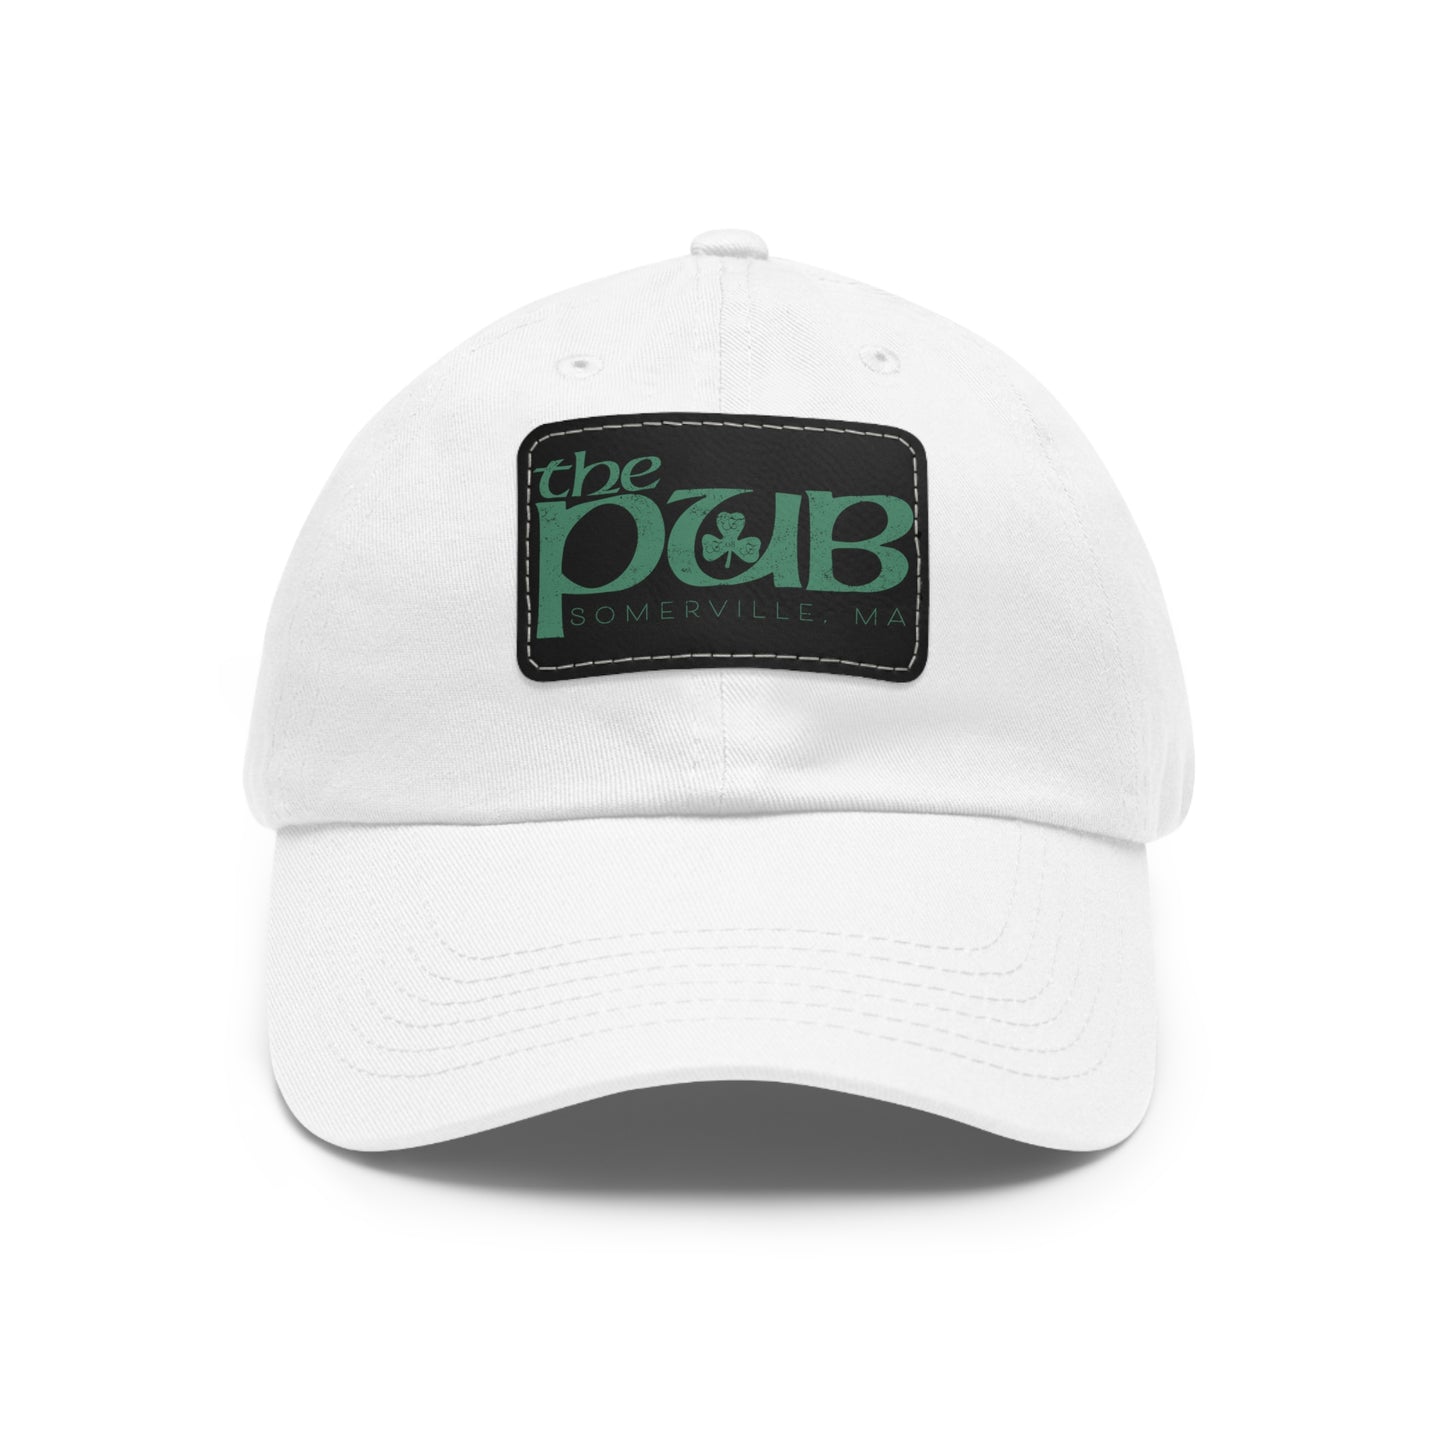 The Pub Somerville - Dad Hat with Leather Patch - Big Pub